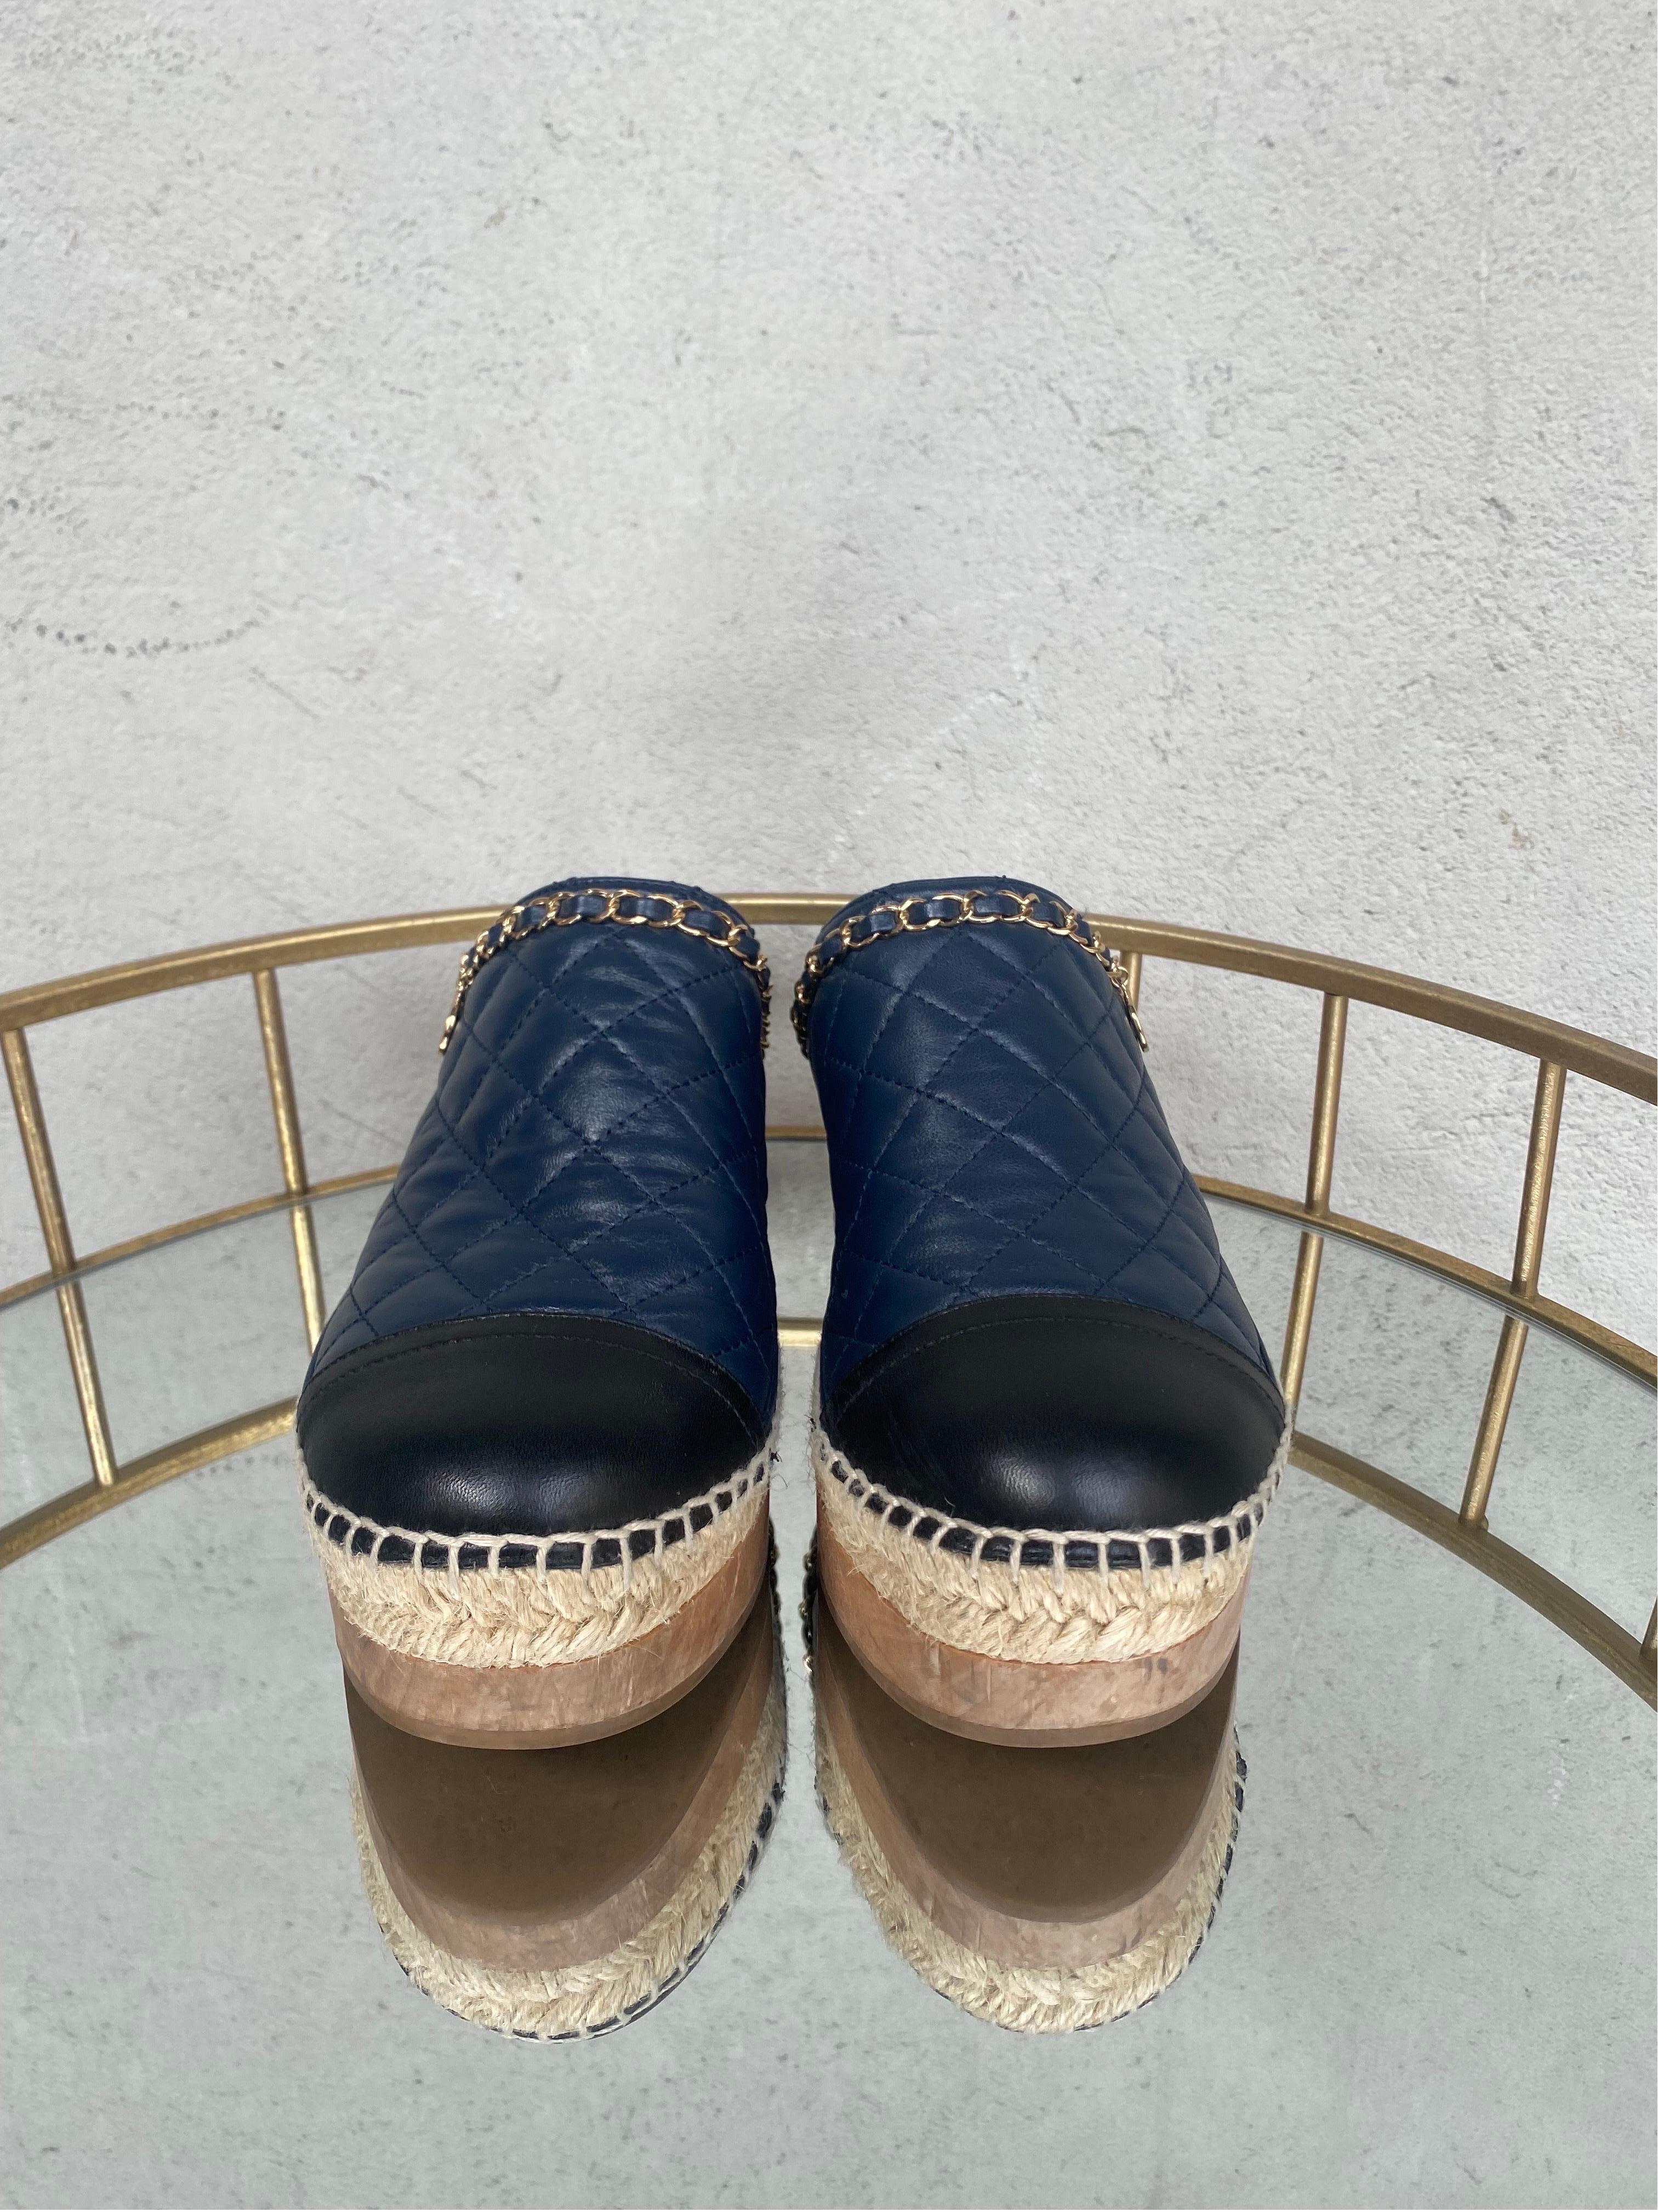 two-tone Chanel clogs in navy blue and black. With golden chain and Chanel logo.
Matelassé leather.
Number 39. Sole 25cm
6cm heel, 4cm platform.
In very good condition, shows signs of normal use.